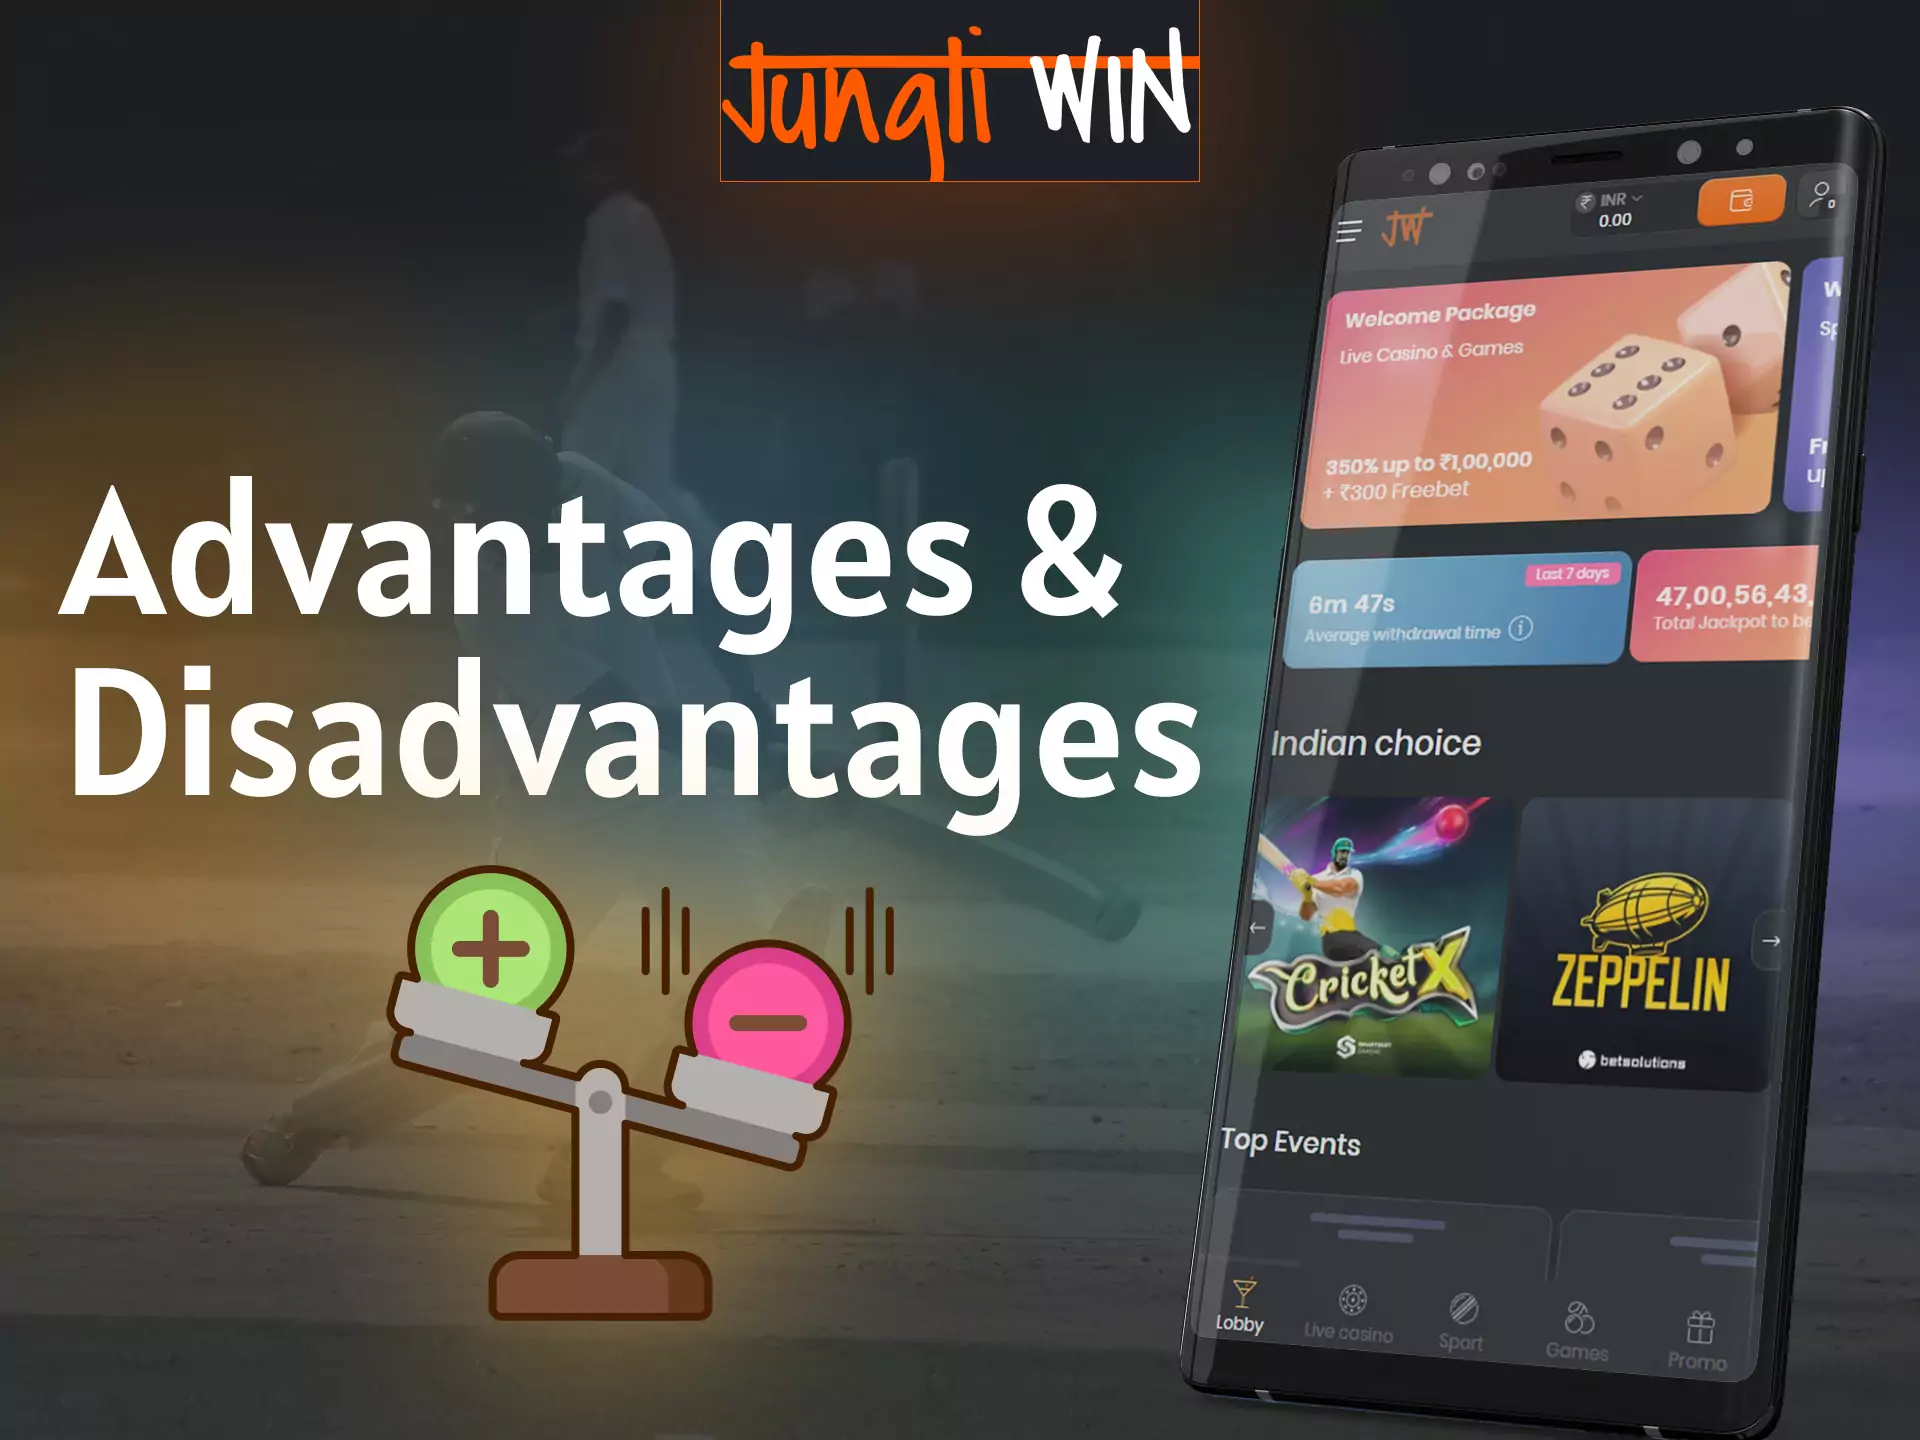 Learn about the advantages of the Jungliwin app and play with pleasure, place bets.